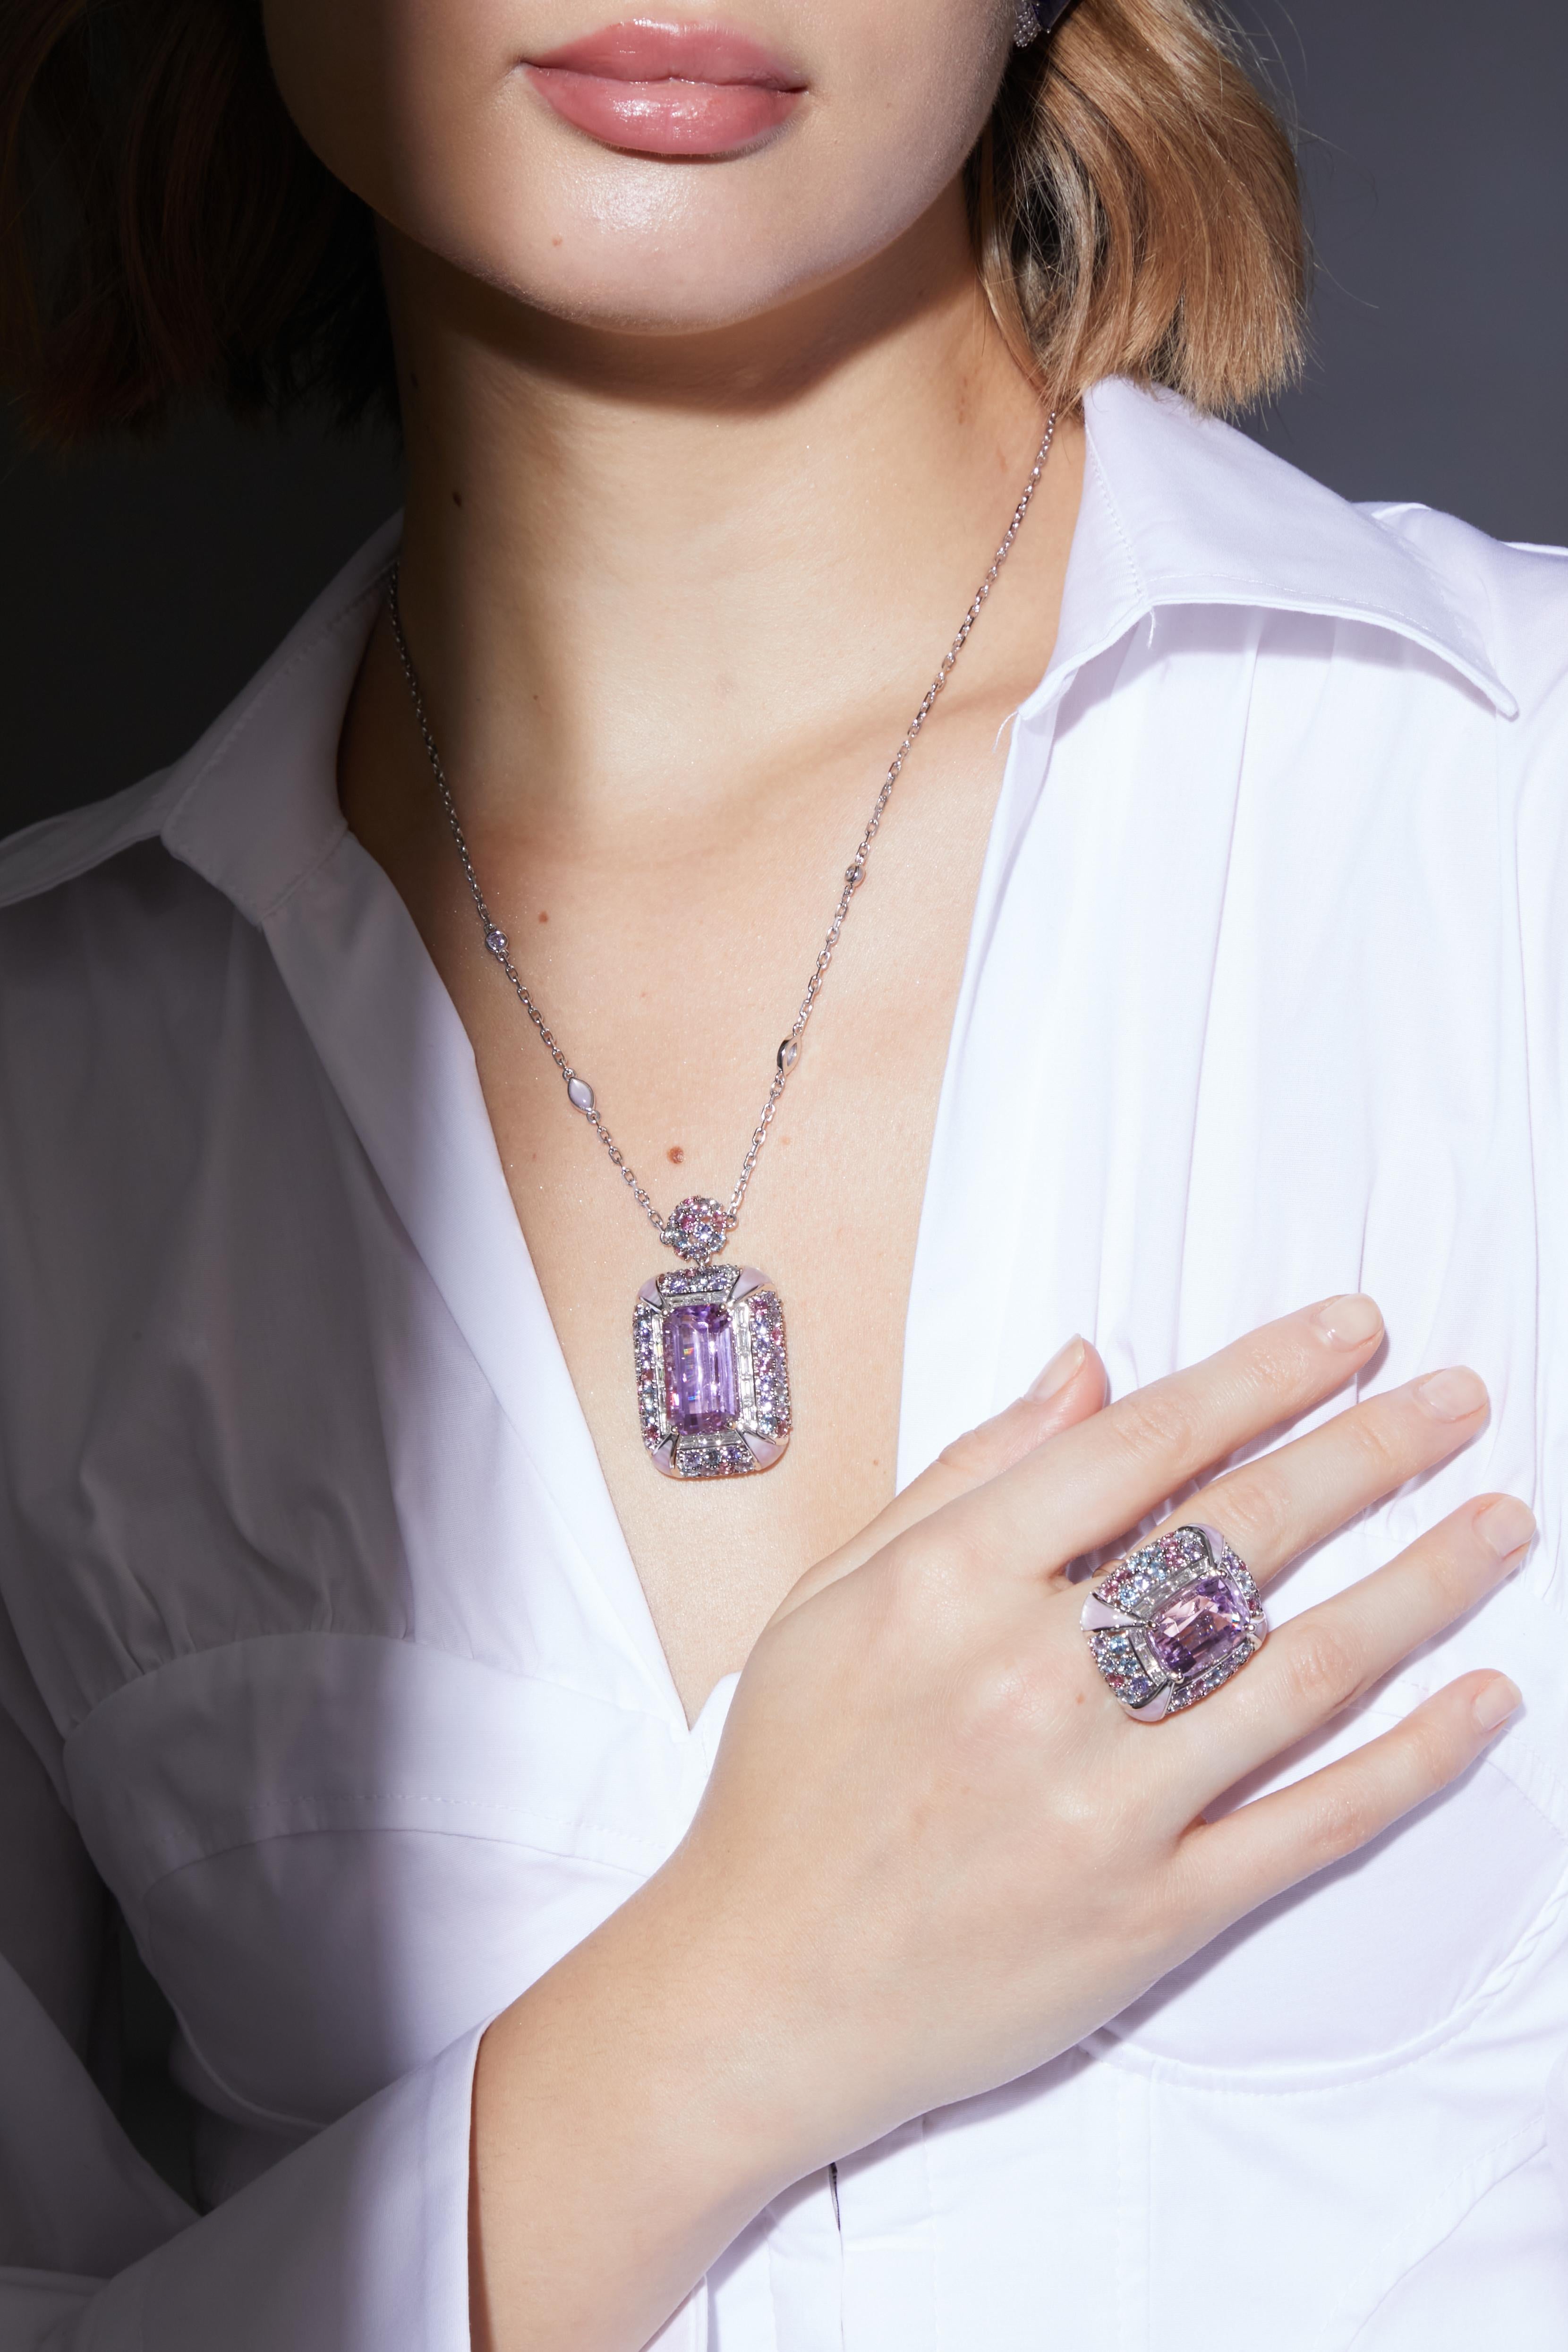 The pretty pink hues of Kunzites are often associated with love and romance. Our Cherry Blossom collection uniquely pairs these vibrant Kunzites with a combination of pink mother of pearl, pink tourmaline, aquamarine, tanzanites and diamonds.